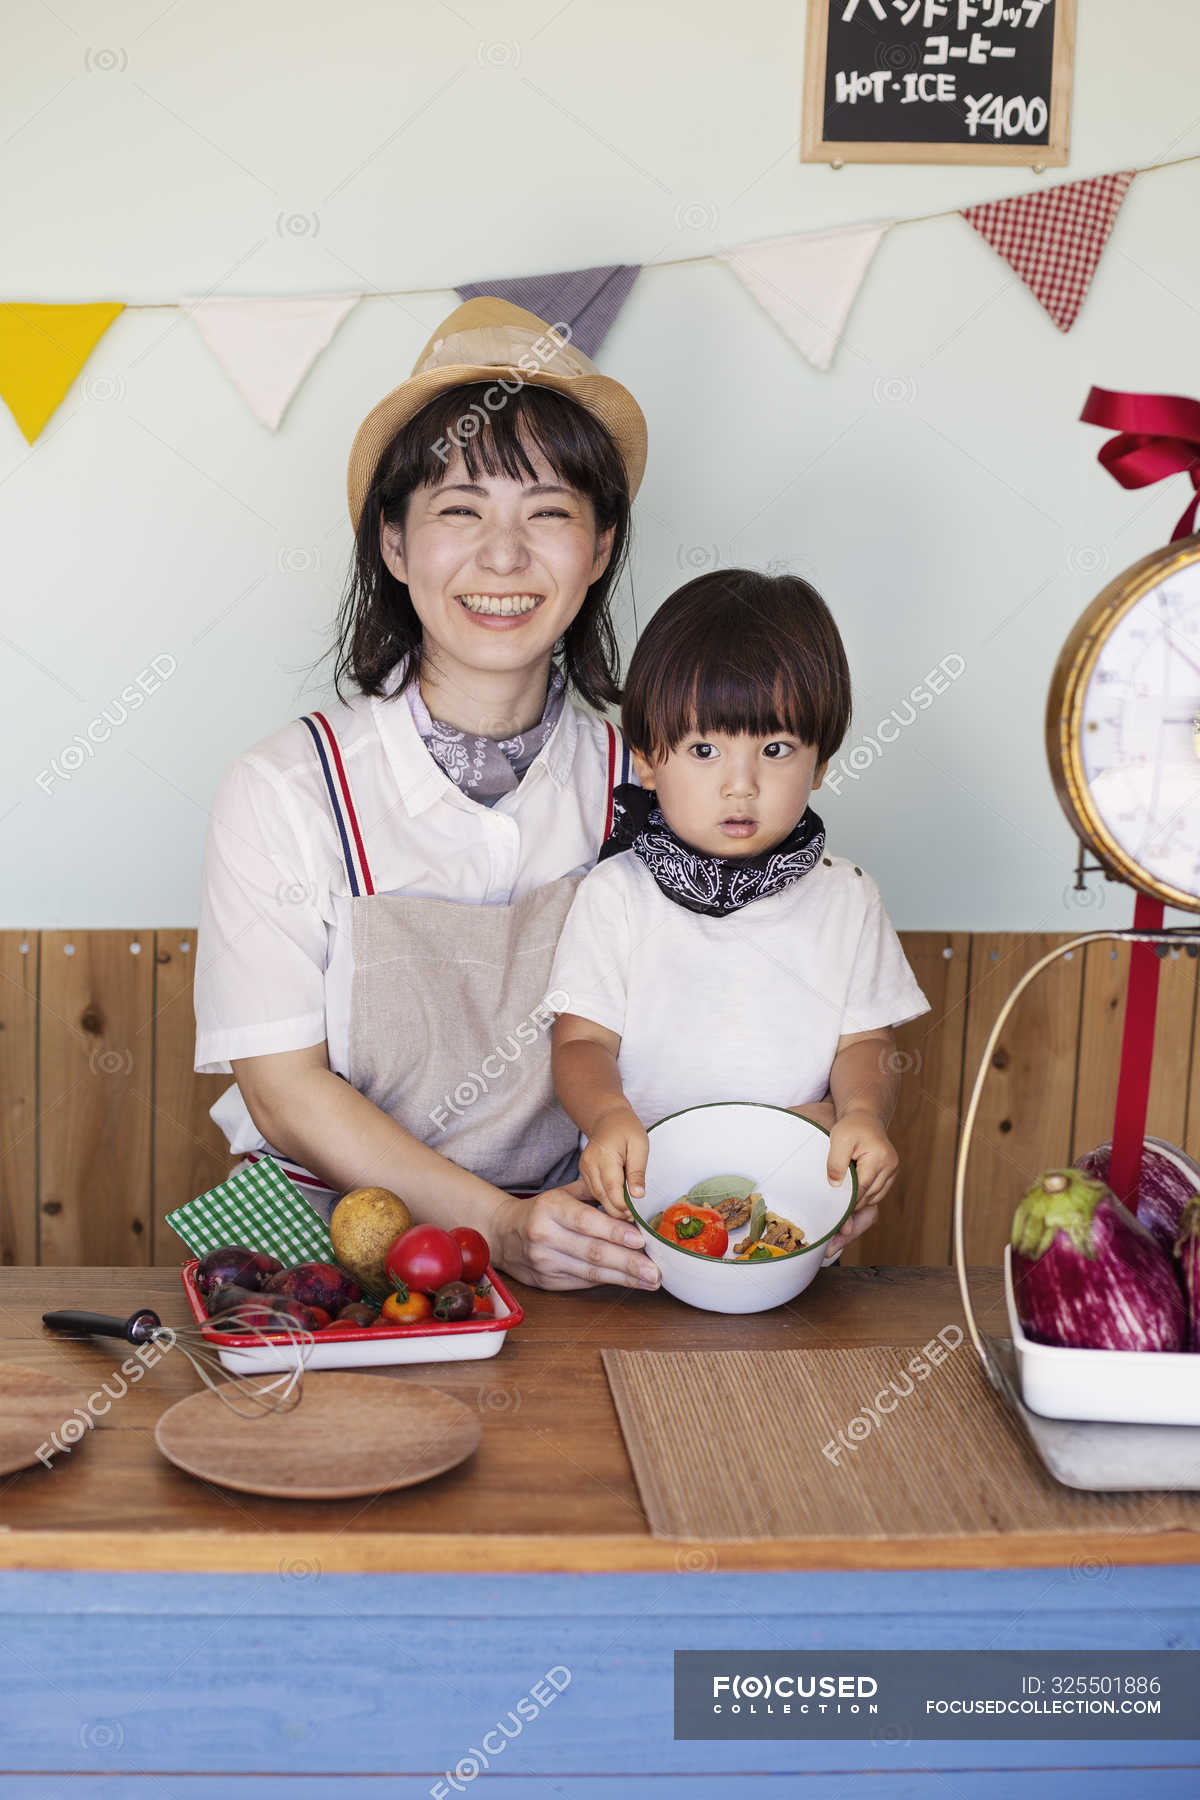 ©Mint ImagesJapanese woman and boy standing in a